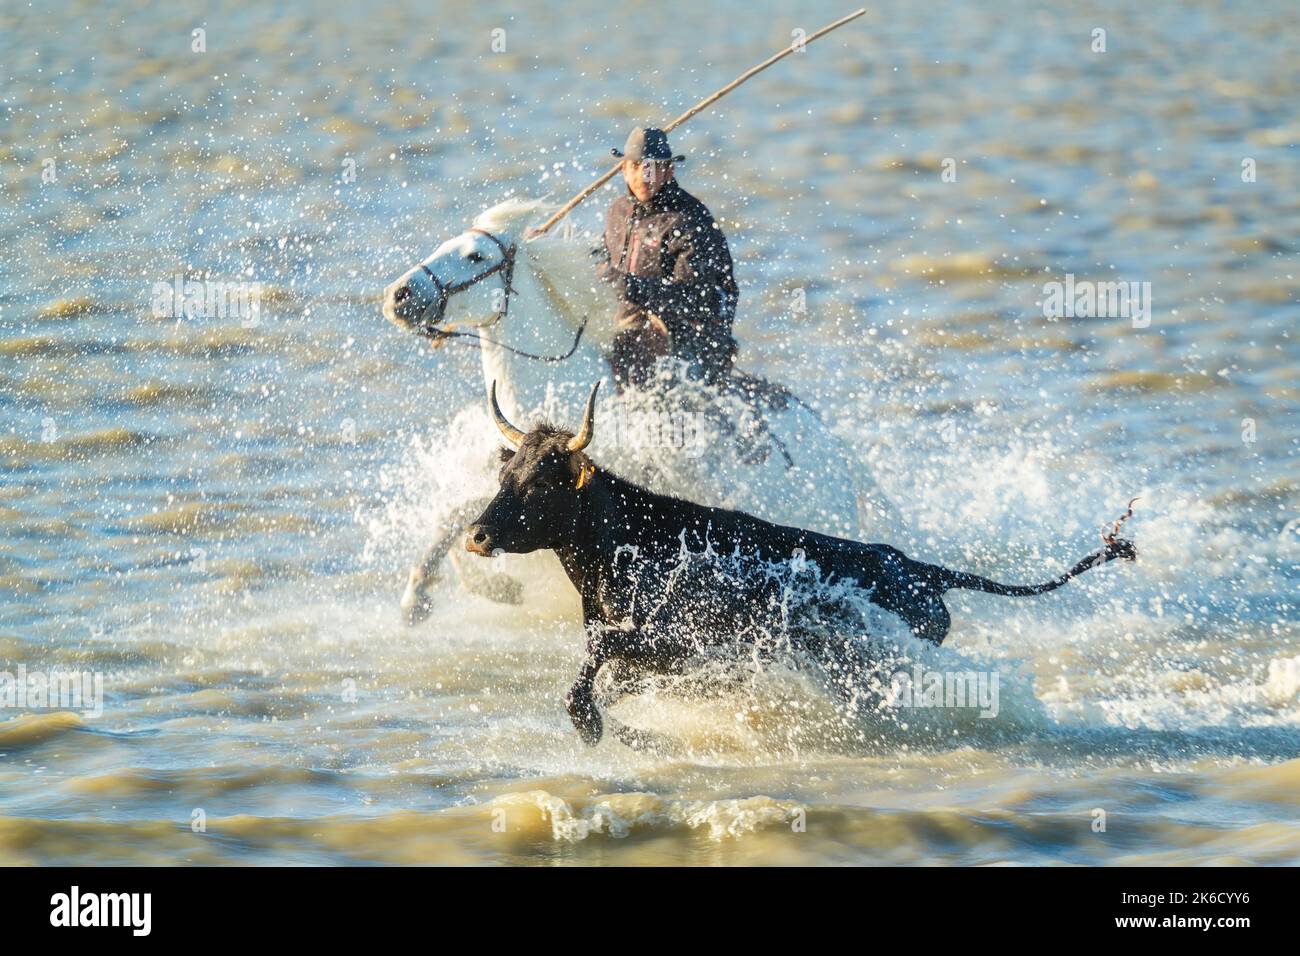 Gardian rounding up bull in water, Marshland, The Camargue, France Stock Photo